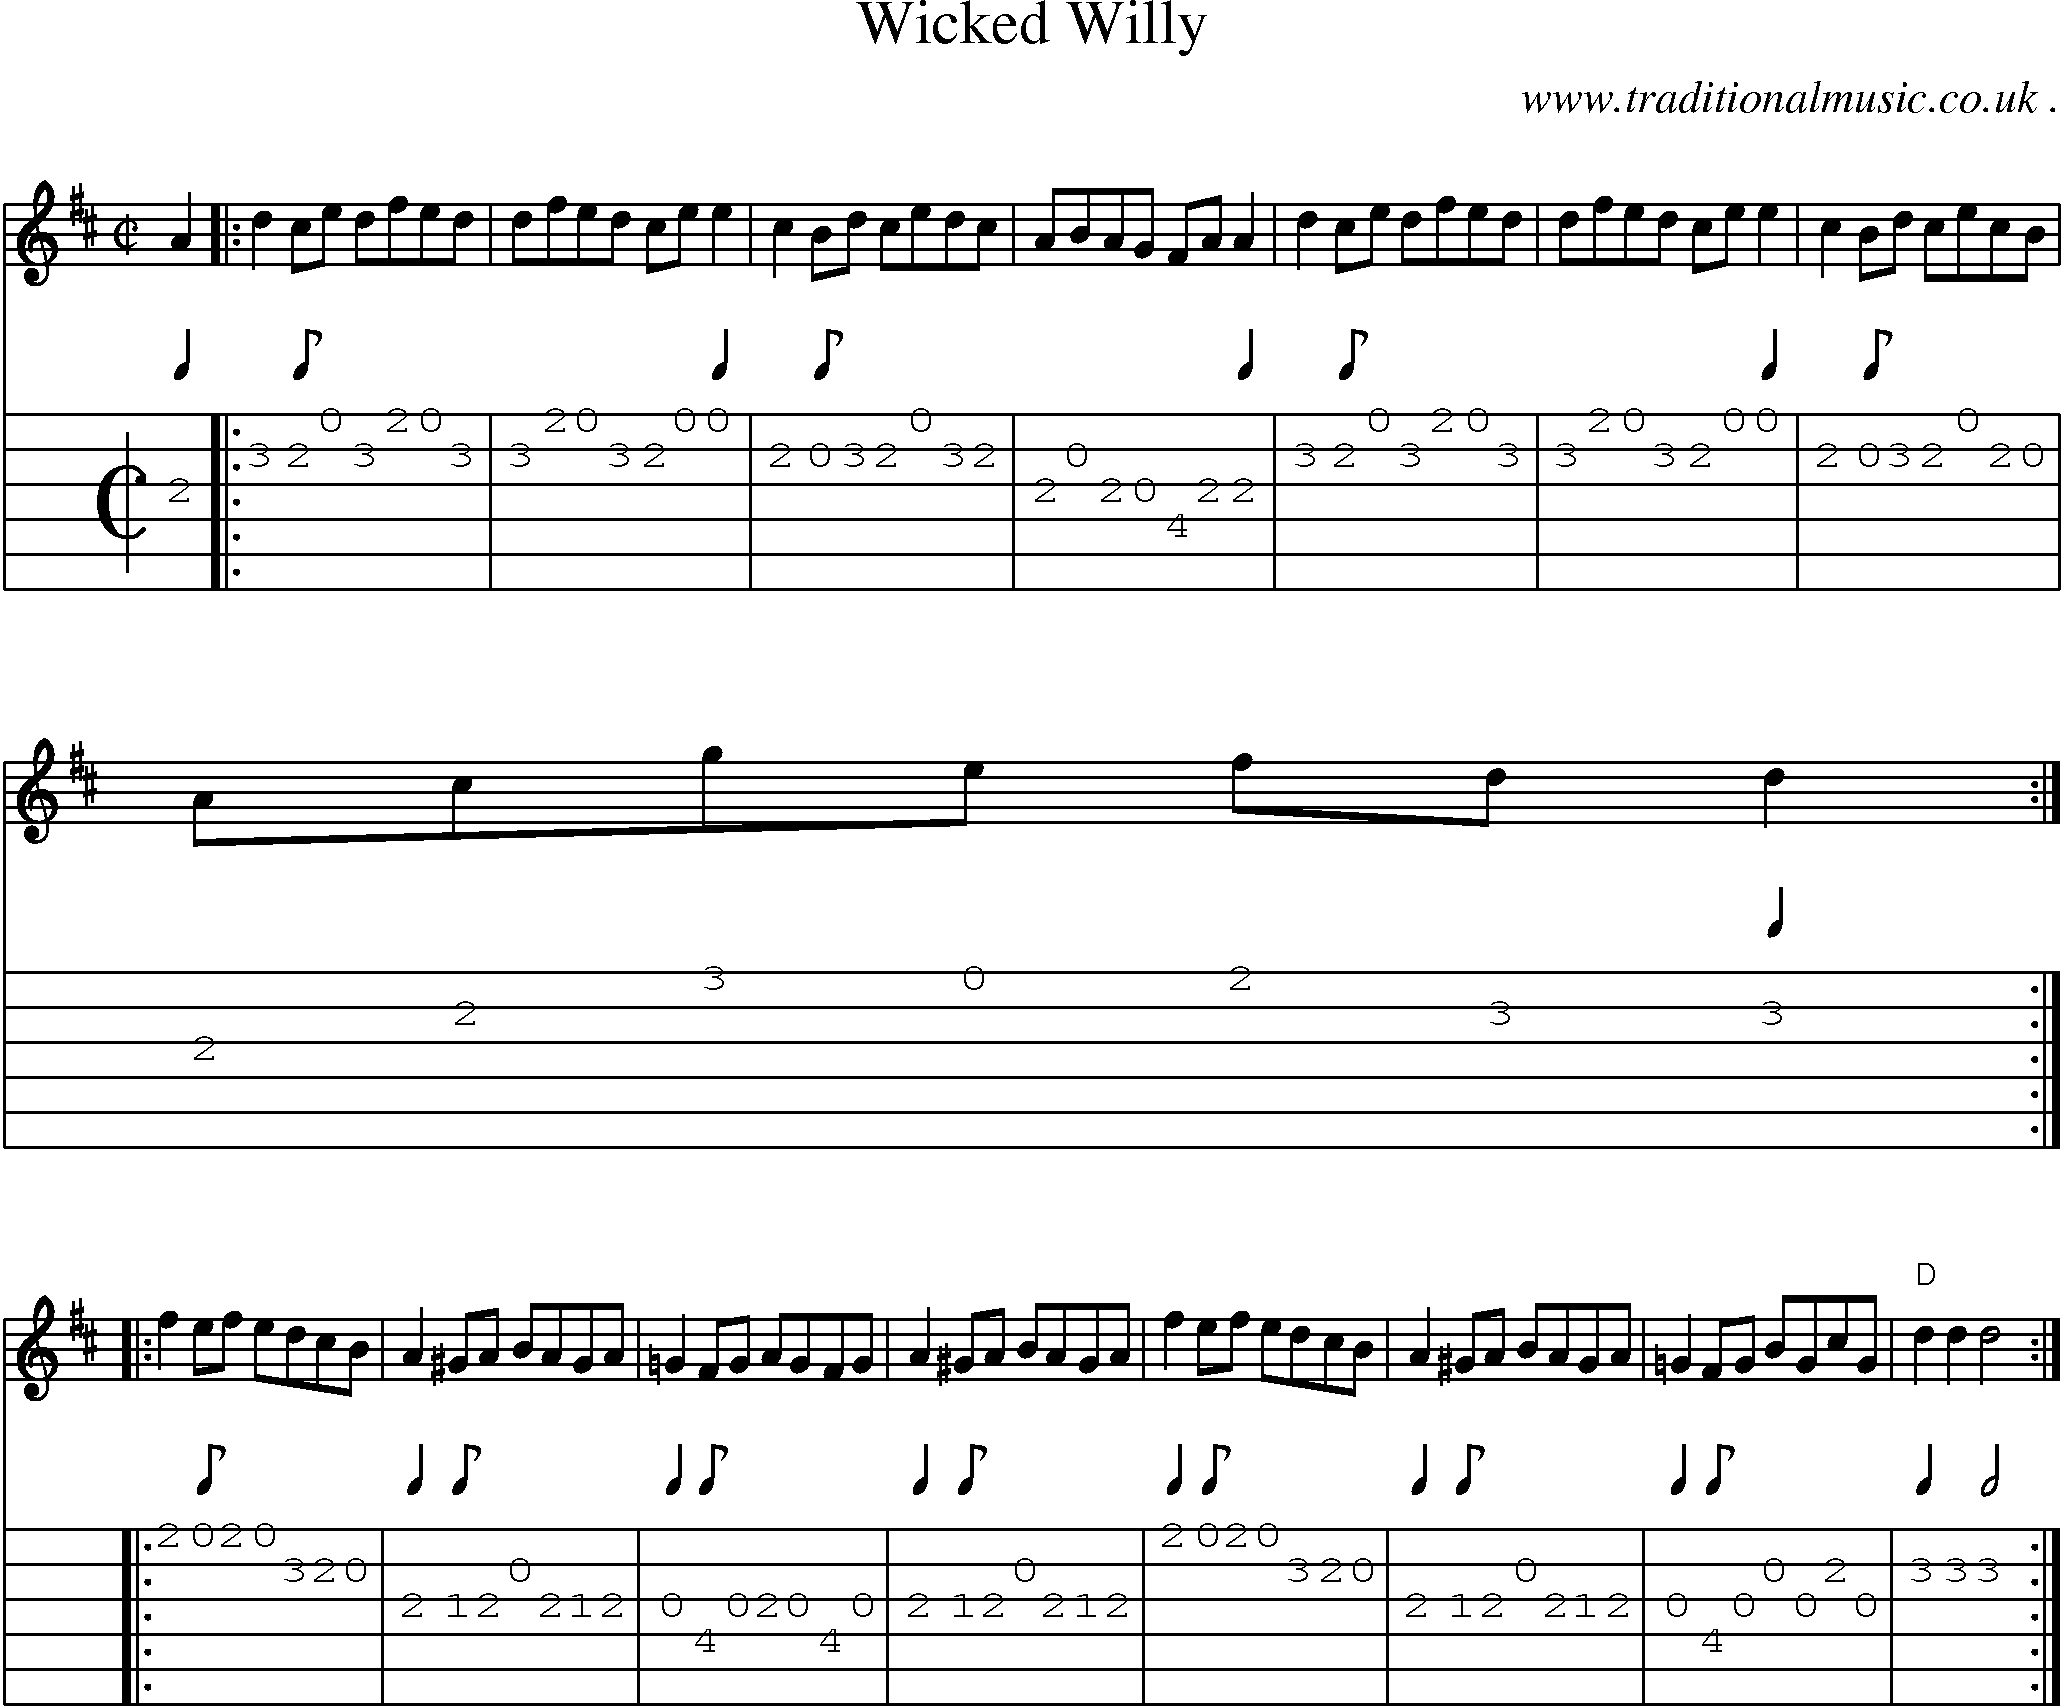 Sheet-music  score, Chords and Guitar Tabs for Wicked Willy